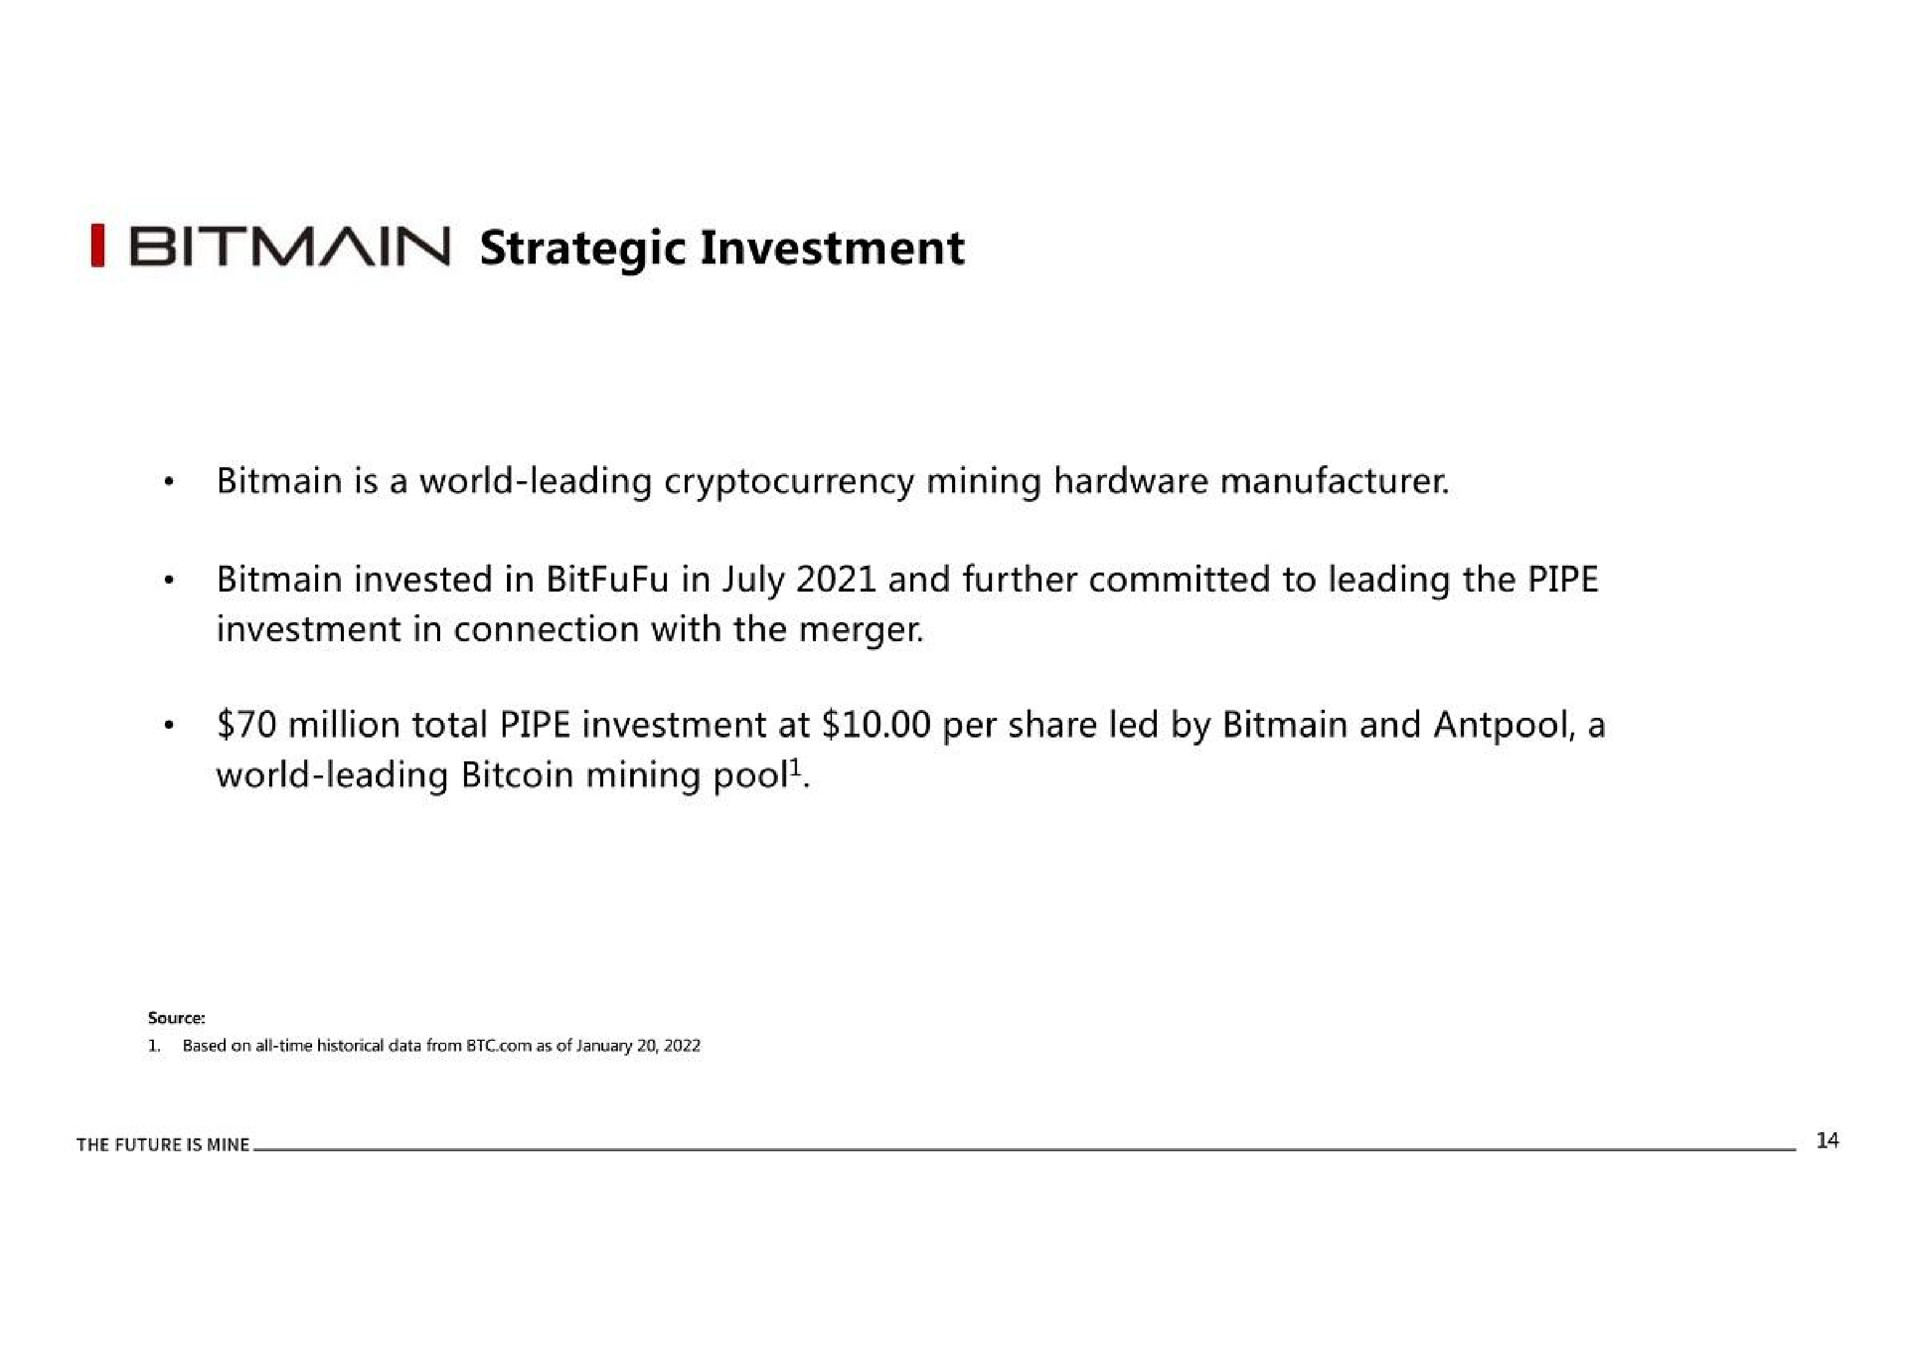 strategic investment is a world leading mining hardware manufacturer invested in in and further committed to leading the pipe investment in connection with the merger million total pipe investment at per share led by and a world leading mining pool | BitFuFu